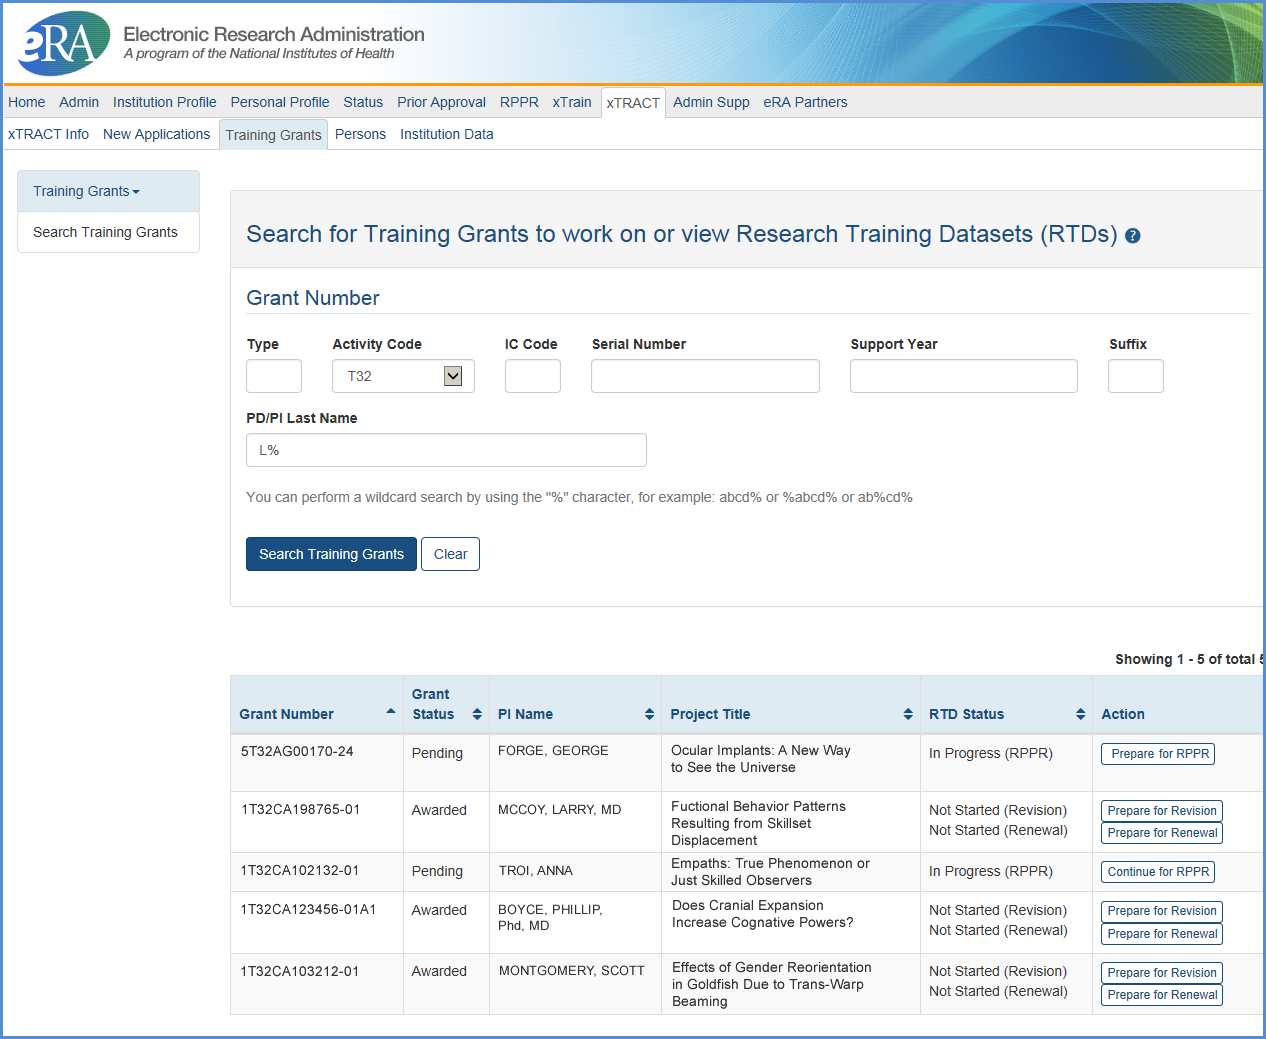 xTRACT Application search results screen 